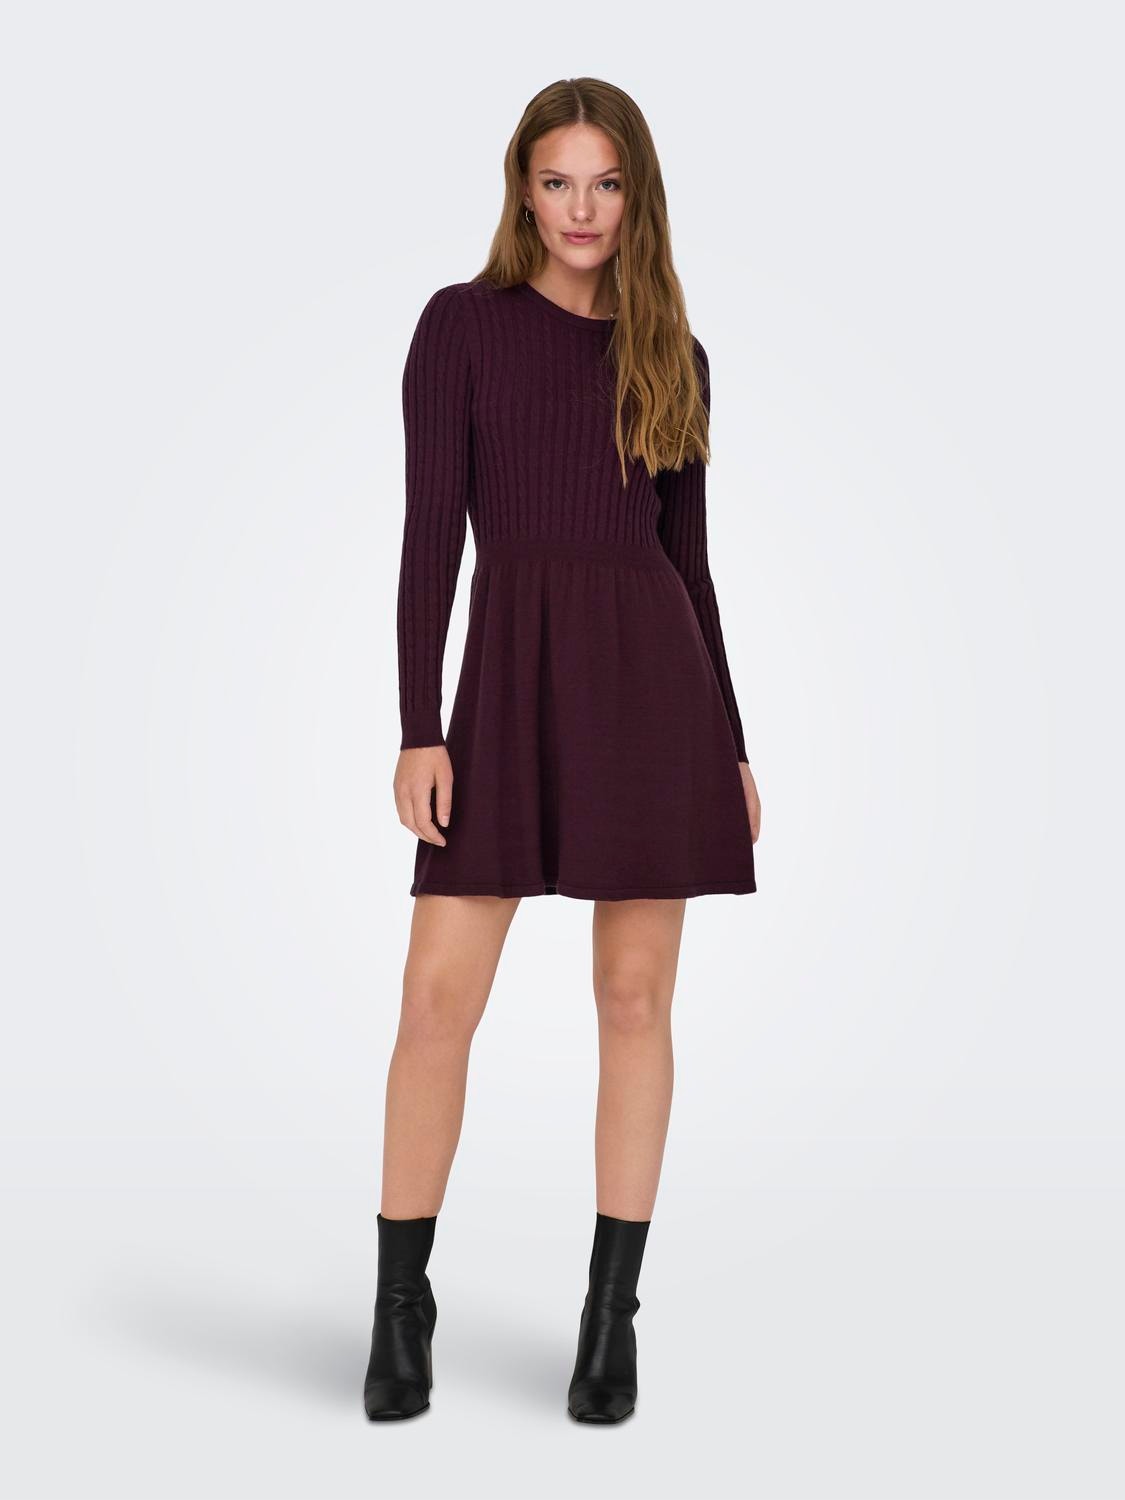 Mini o-neck knitted dress with 30% ONLY® discount! 